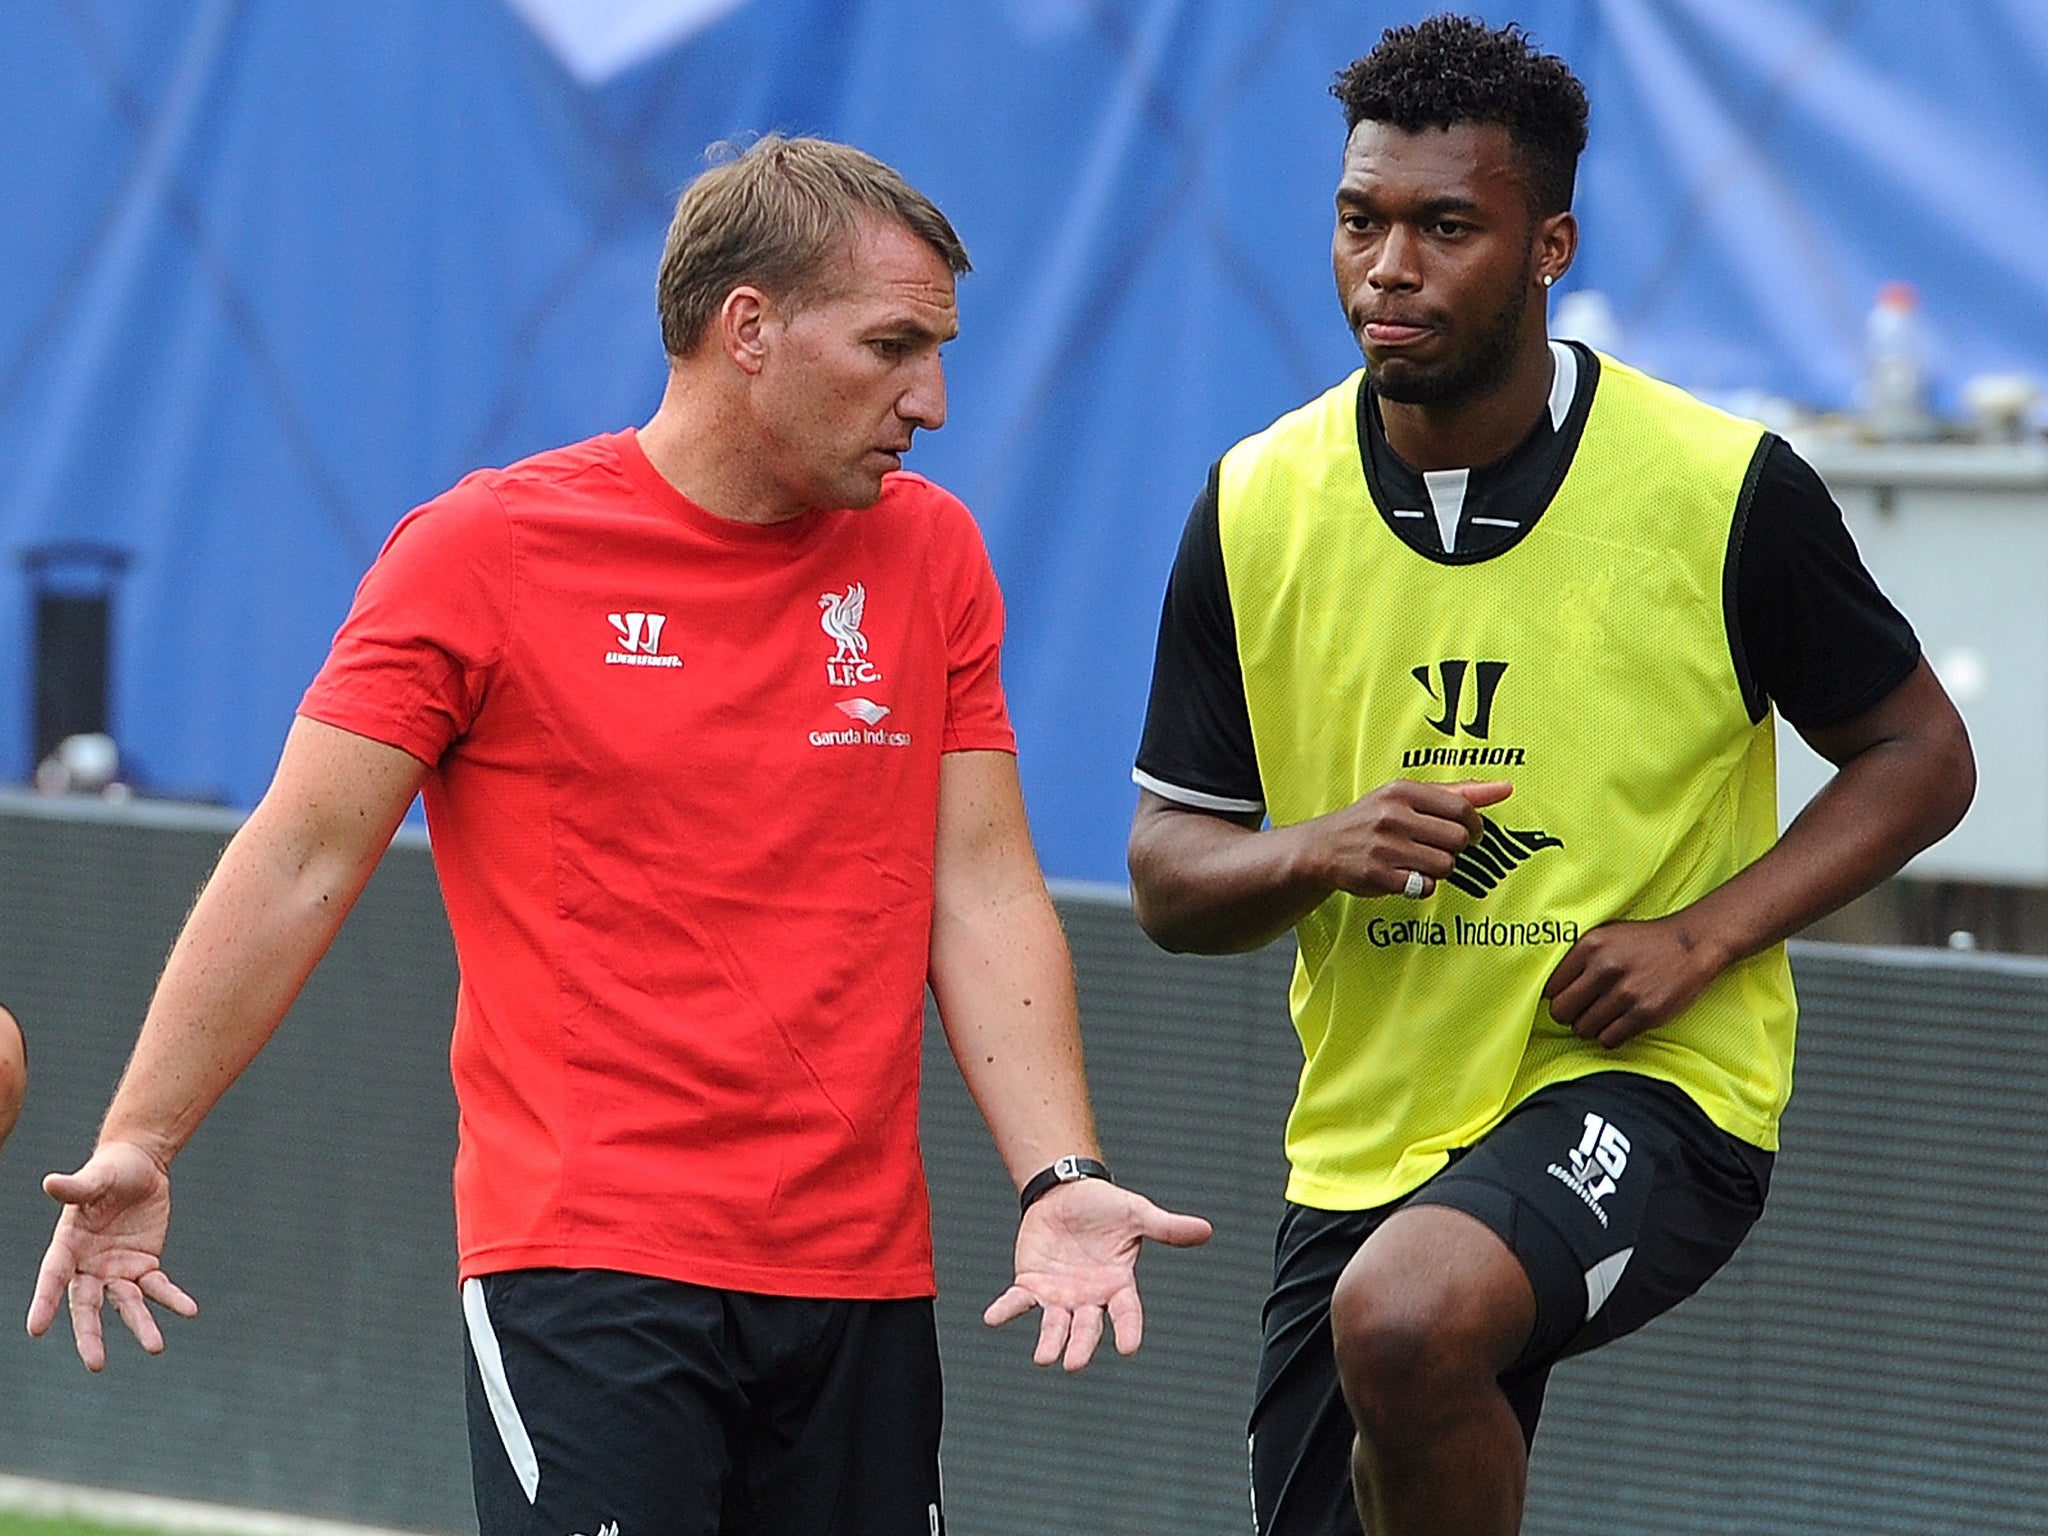 Daniel Sturridge will travel to Madrid but is 'very unlikely' to play